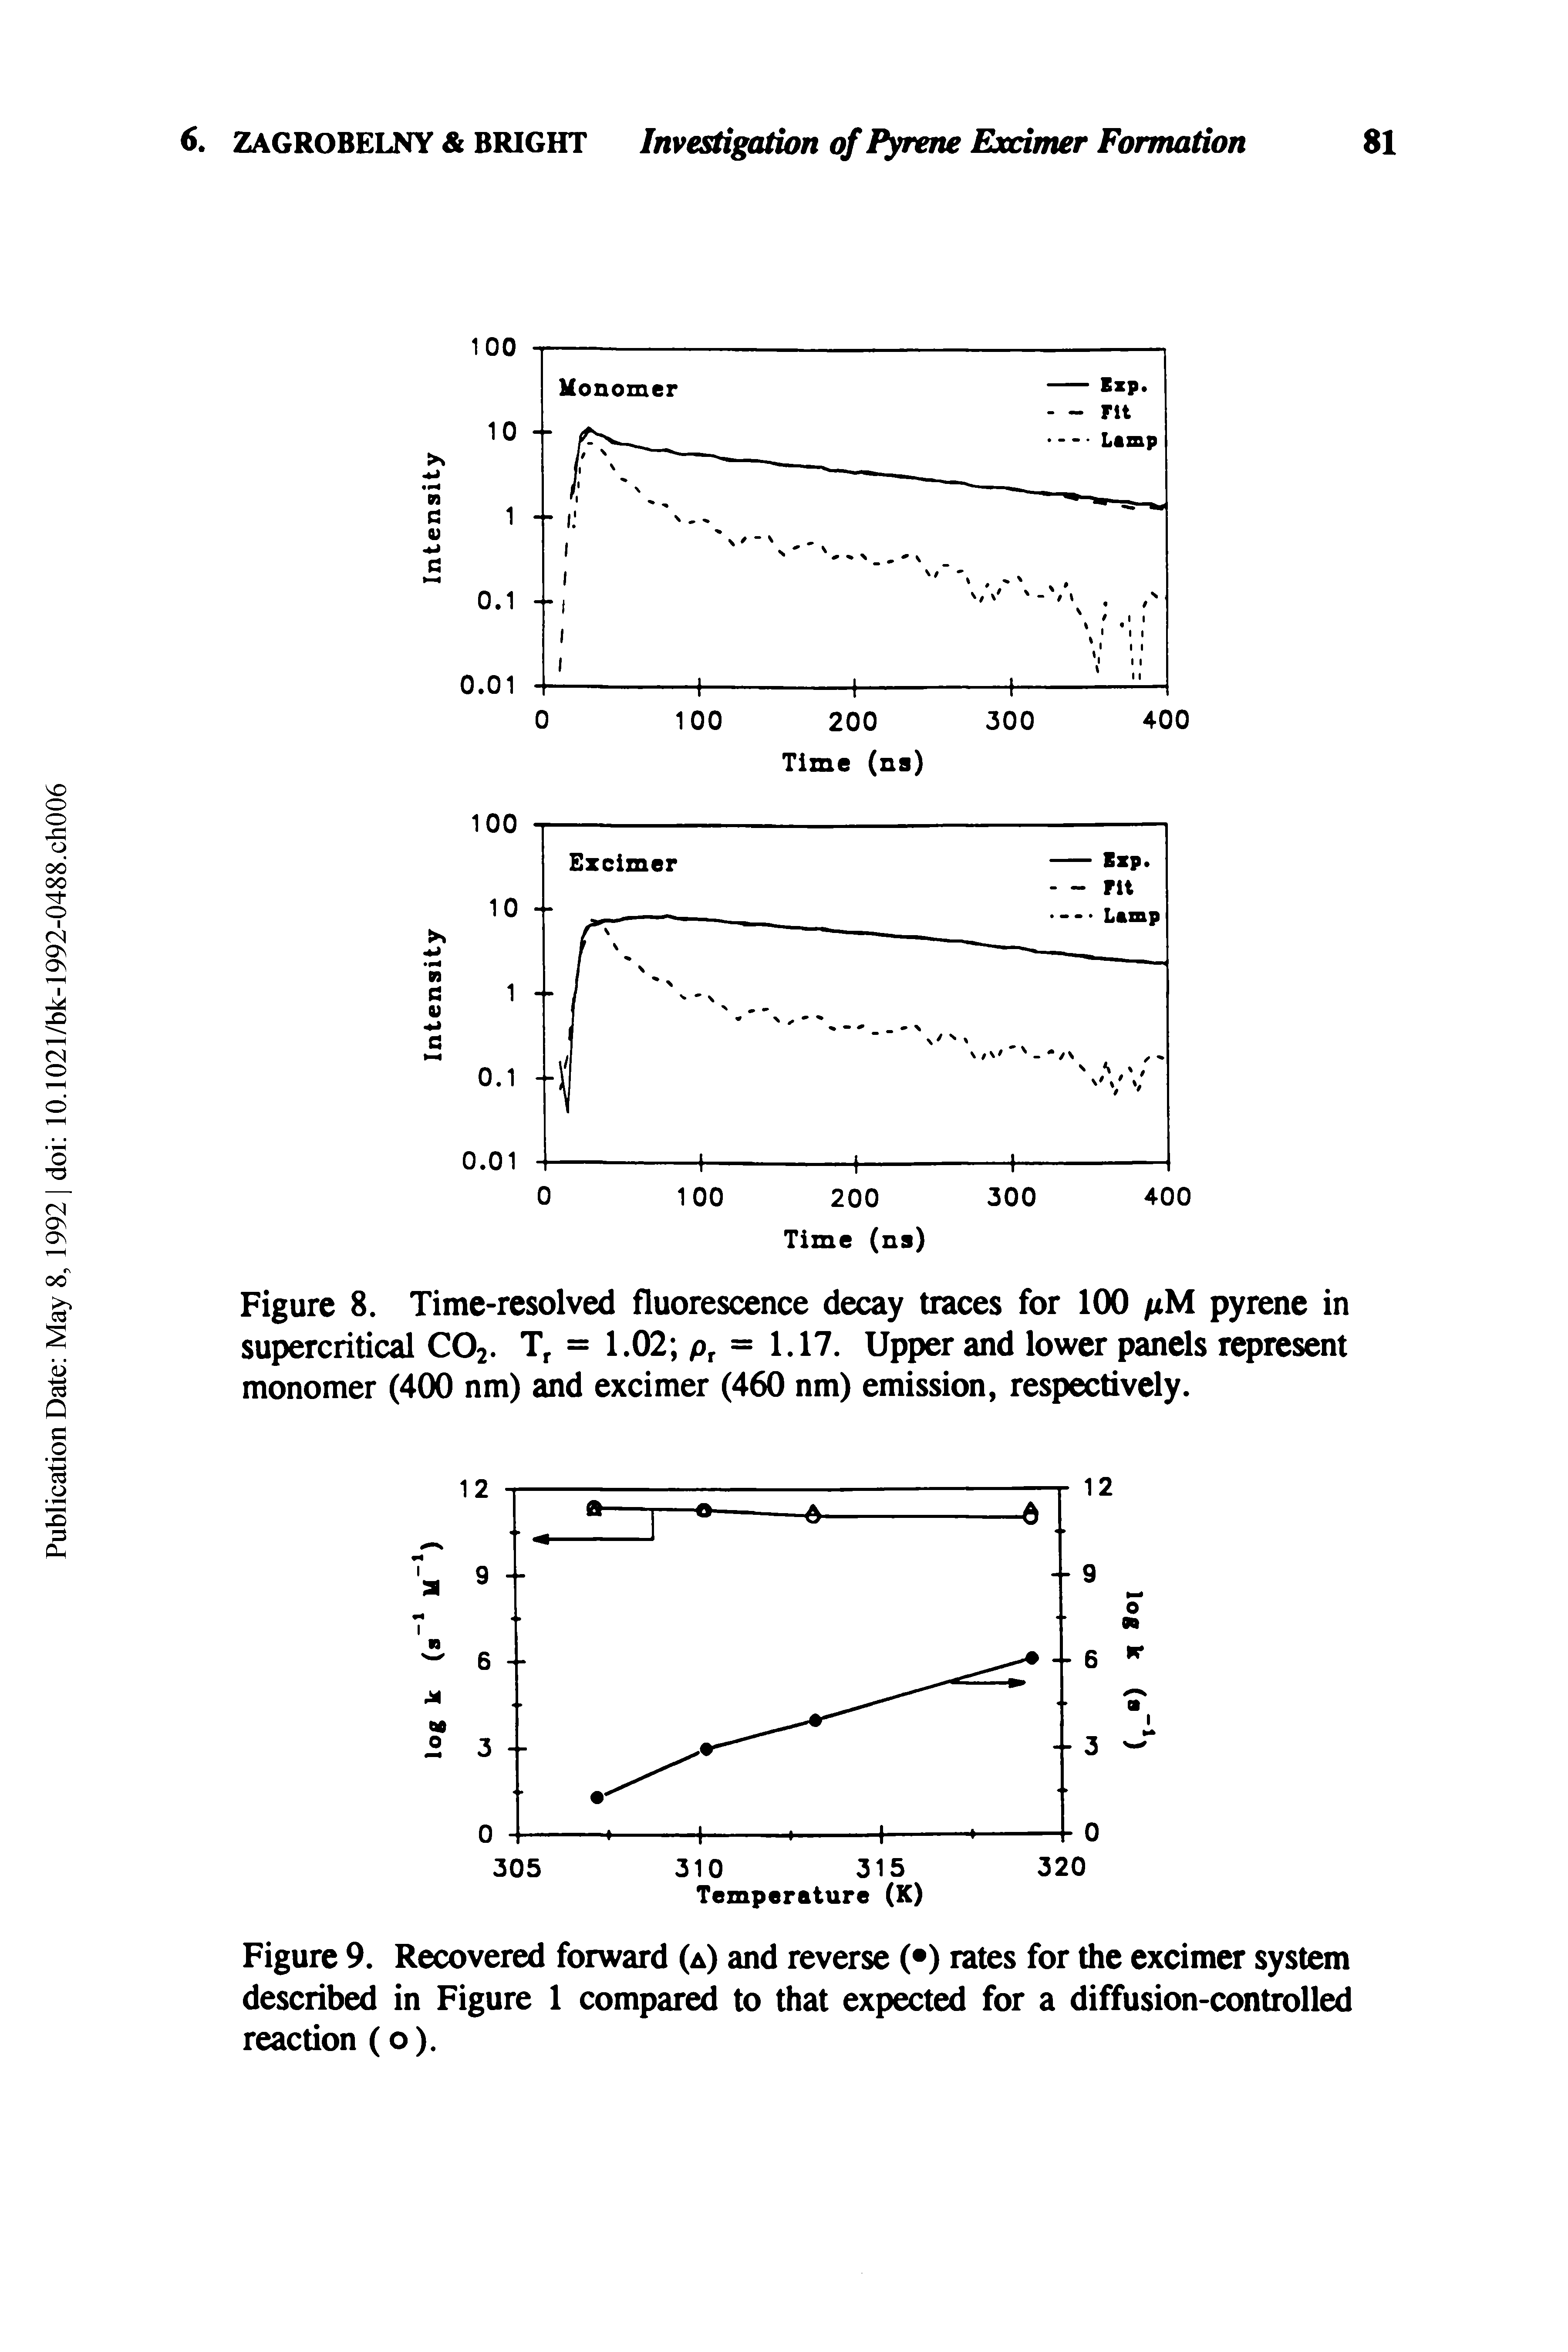 Figure 9. Recovered forward (a) and reverse ( ) rates for the excimer system described in Figure 1 compared to that expected for a diffusion-controlled reaction (o).